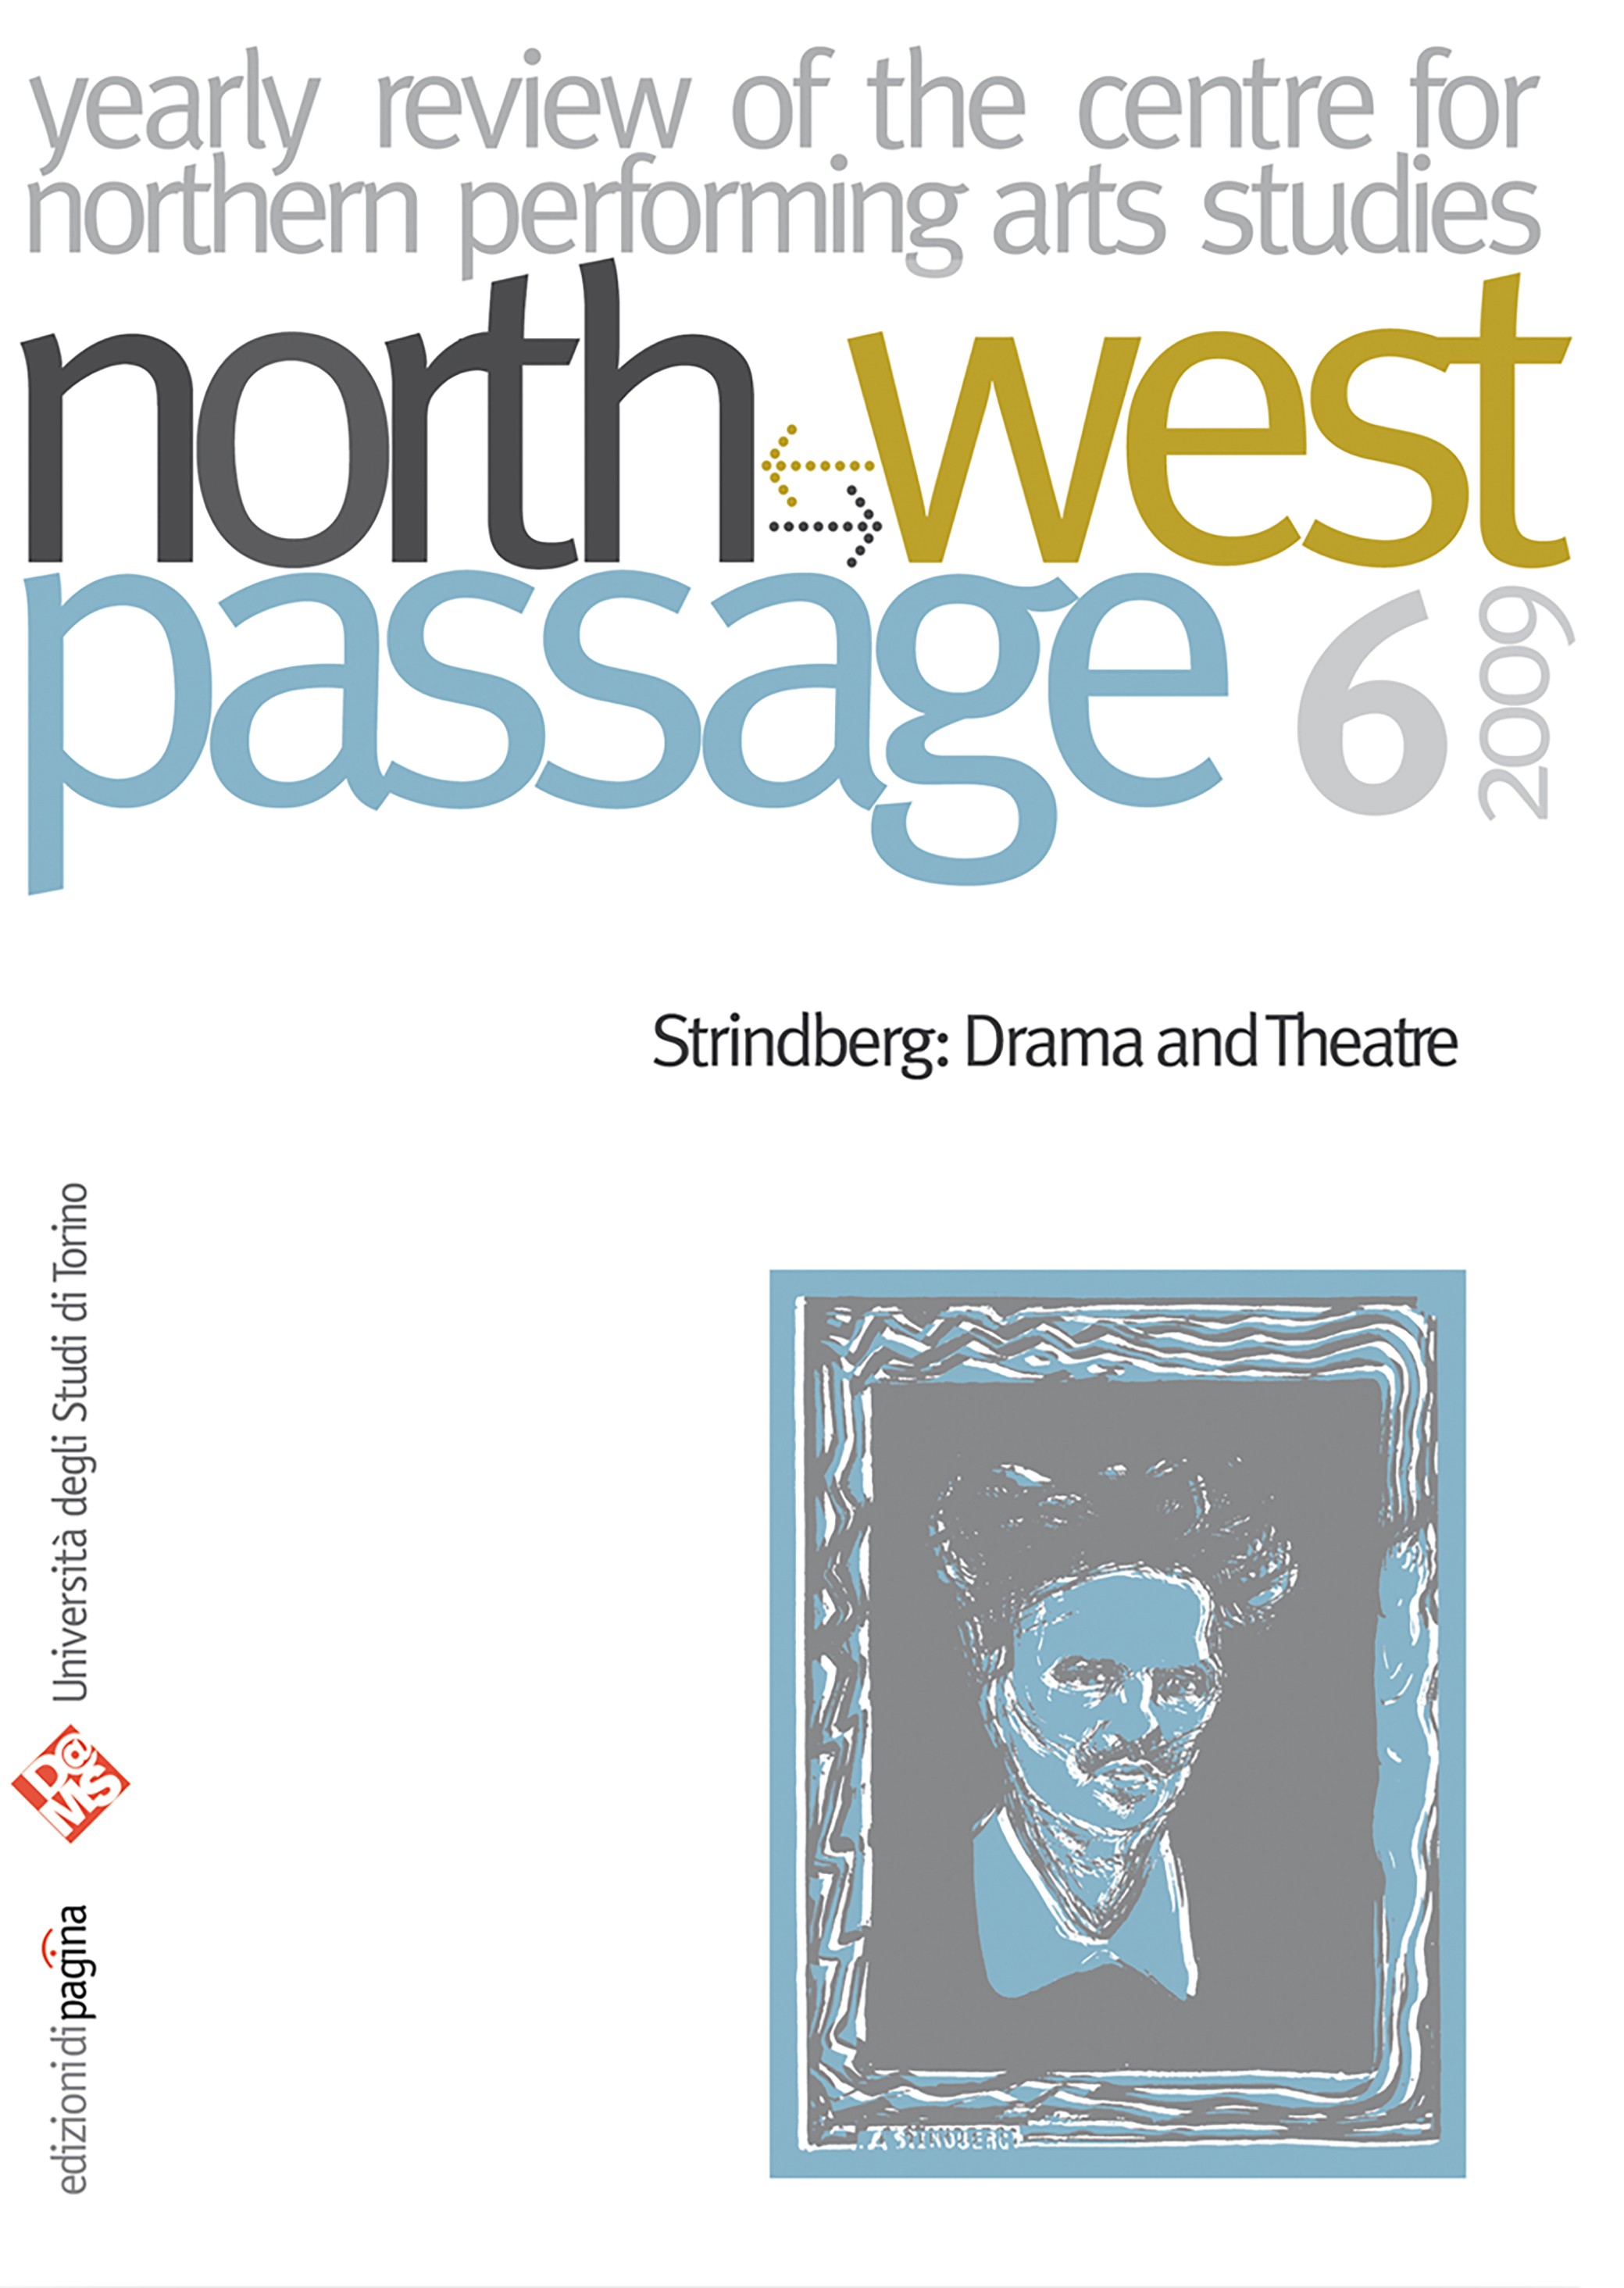 North-West Passage 6/2009. Strindberg: Drama and Theatre - Librerie.coop